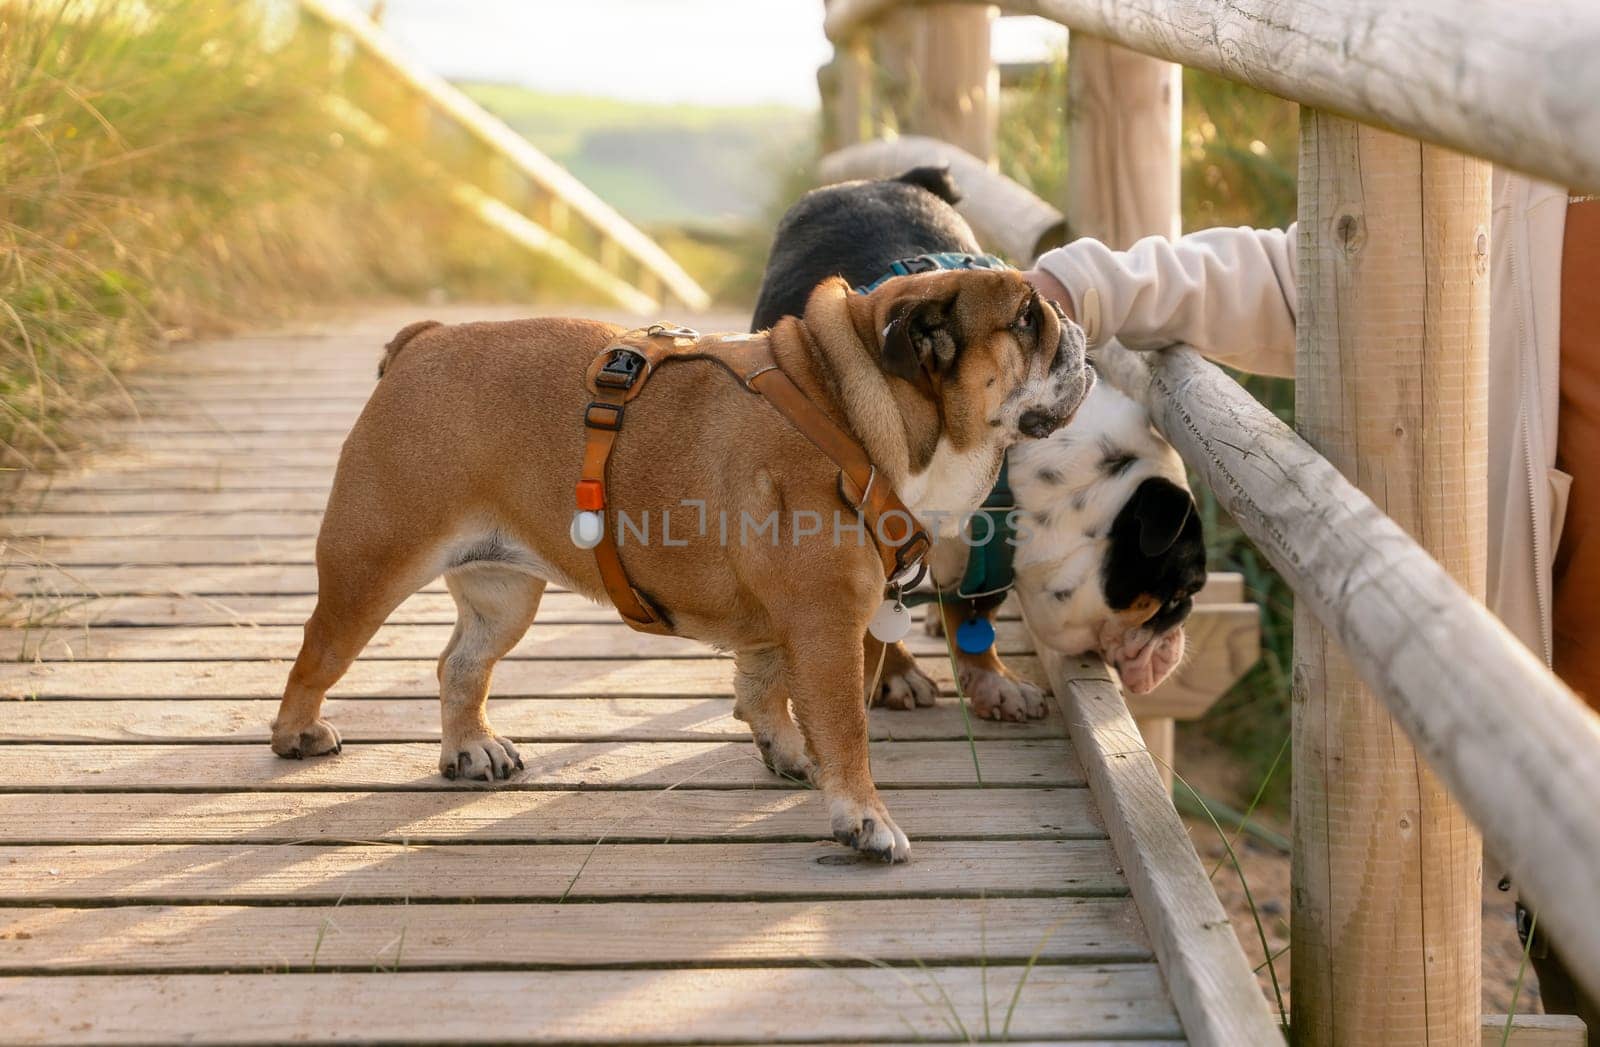 A  man playing with  English bulldogs  dogs going for a walk in Wales seaside.  Dog training. Happy time with dogs.